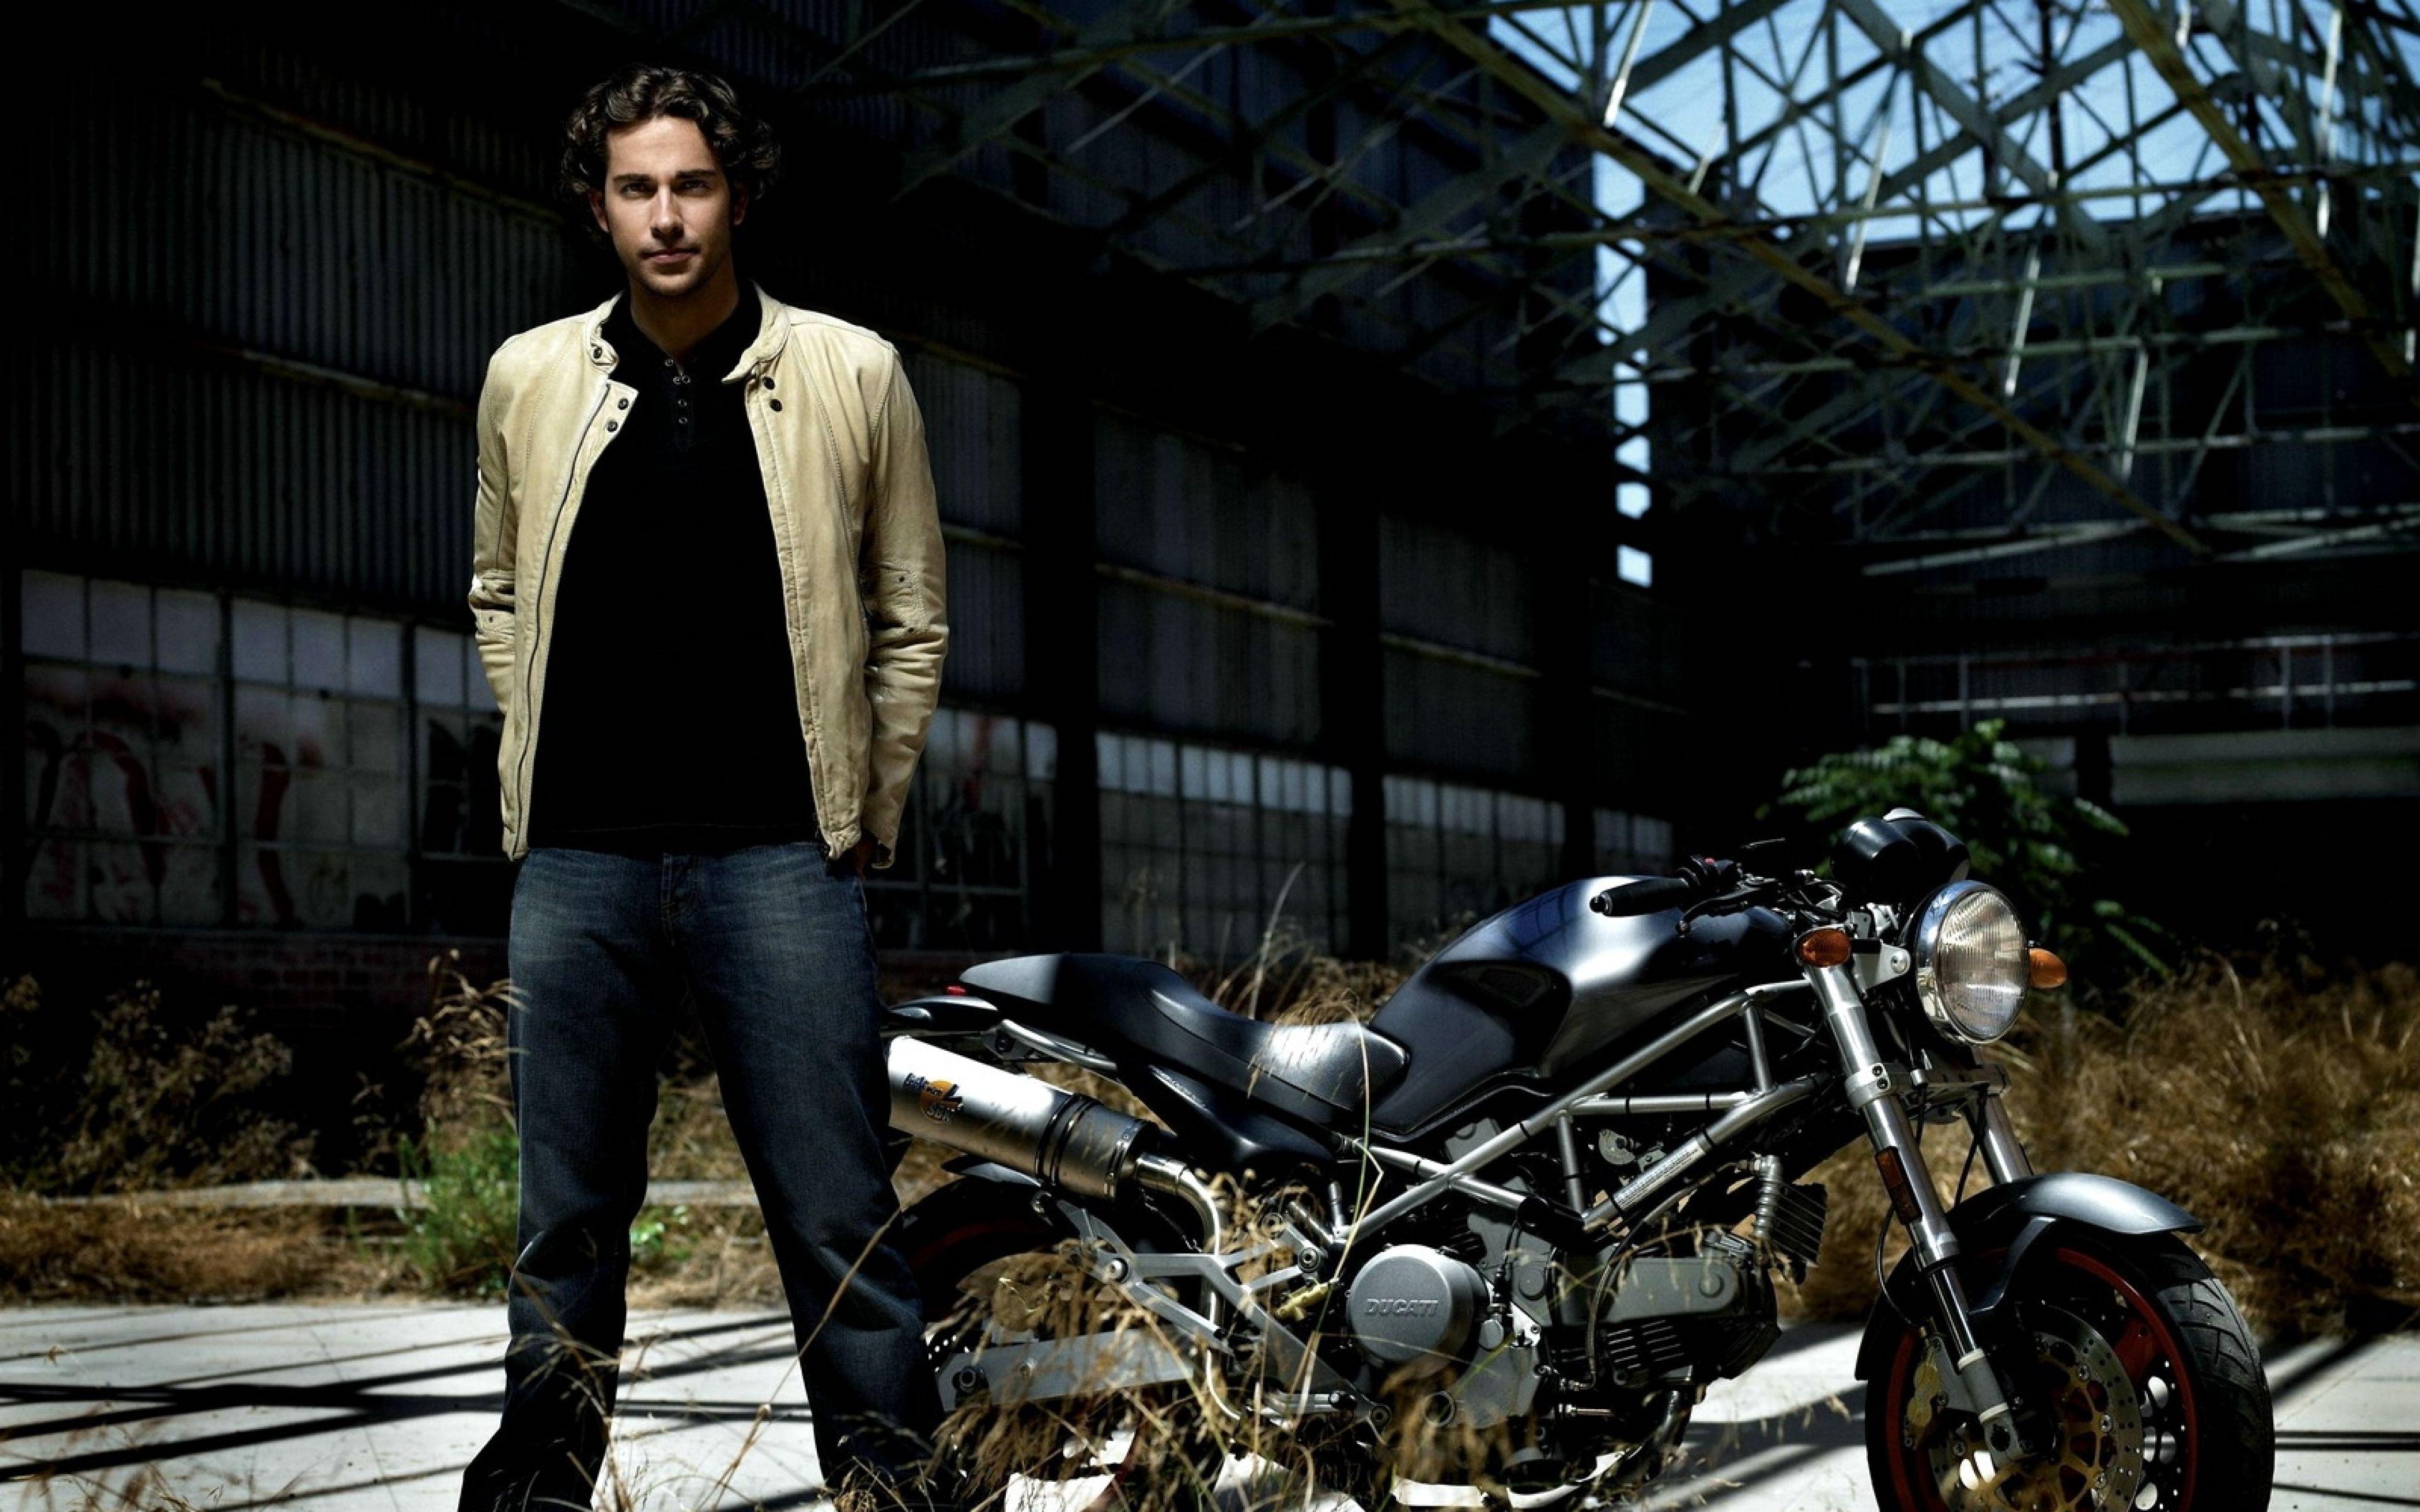 Download Wallpaper 3840x2400 Zachary levi, Motorcycle, Black hair